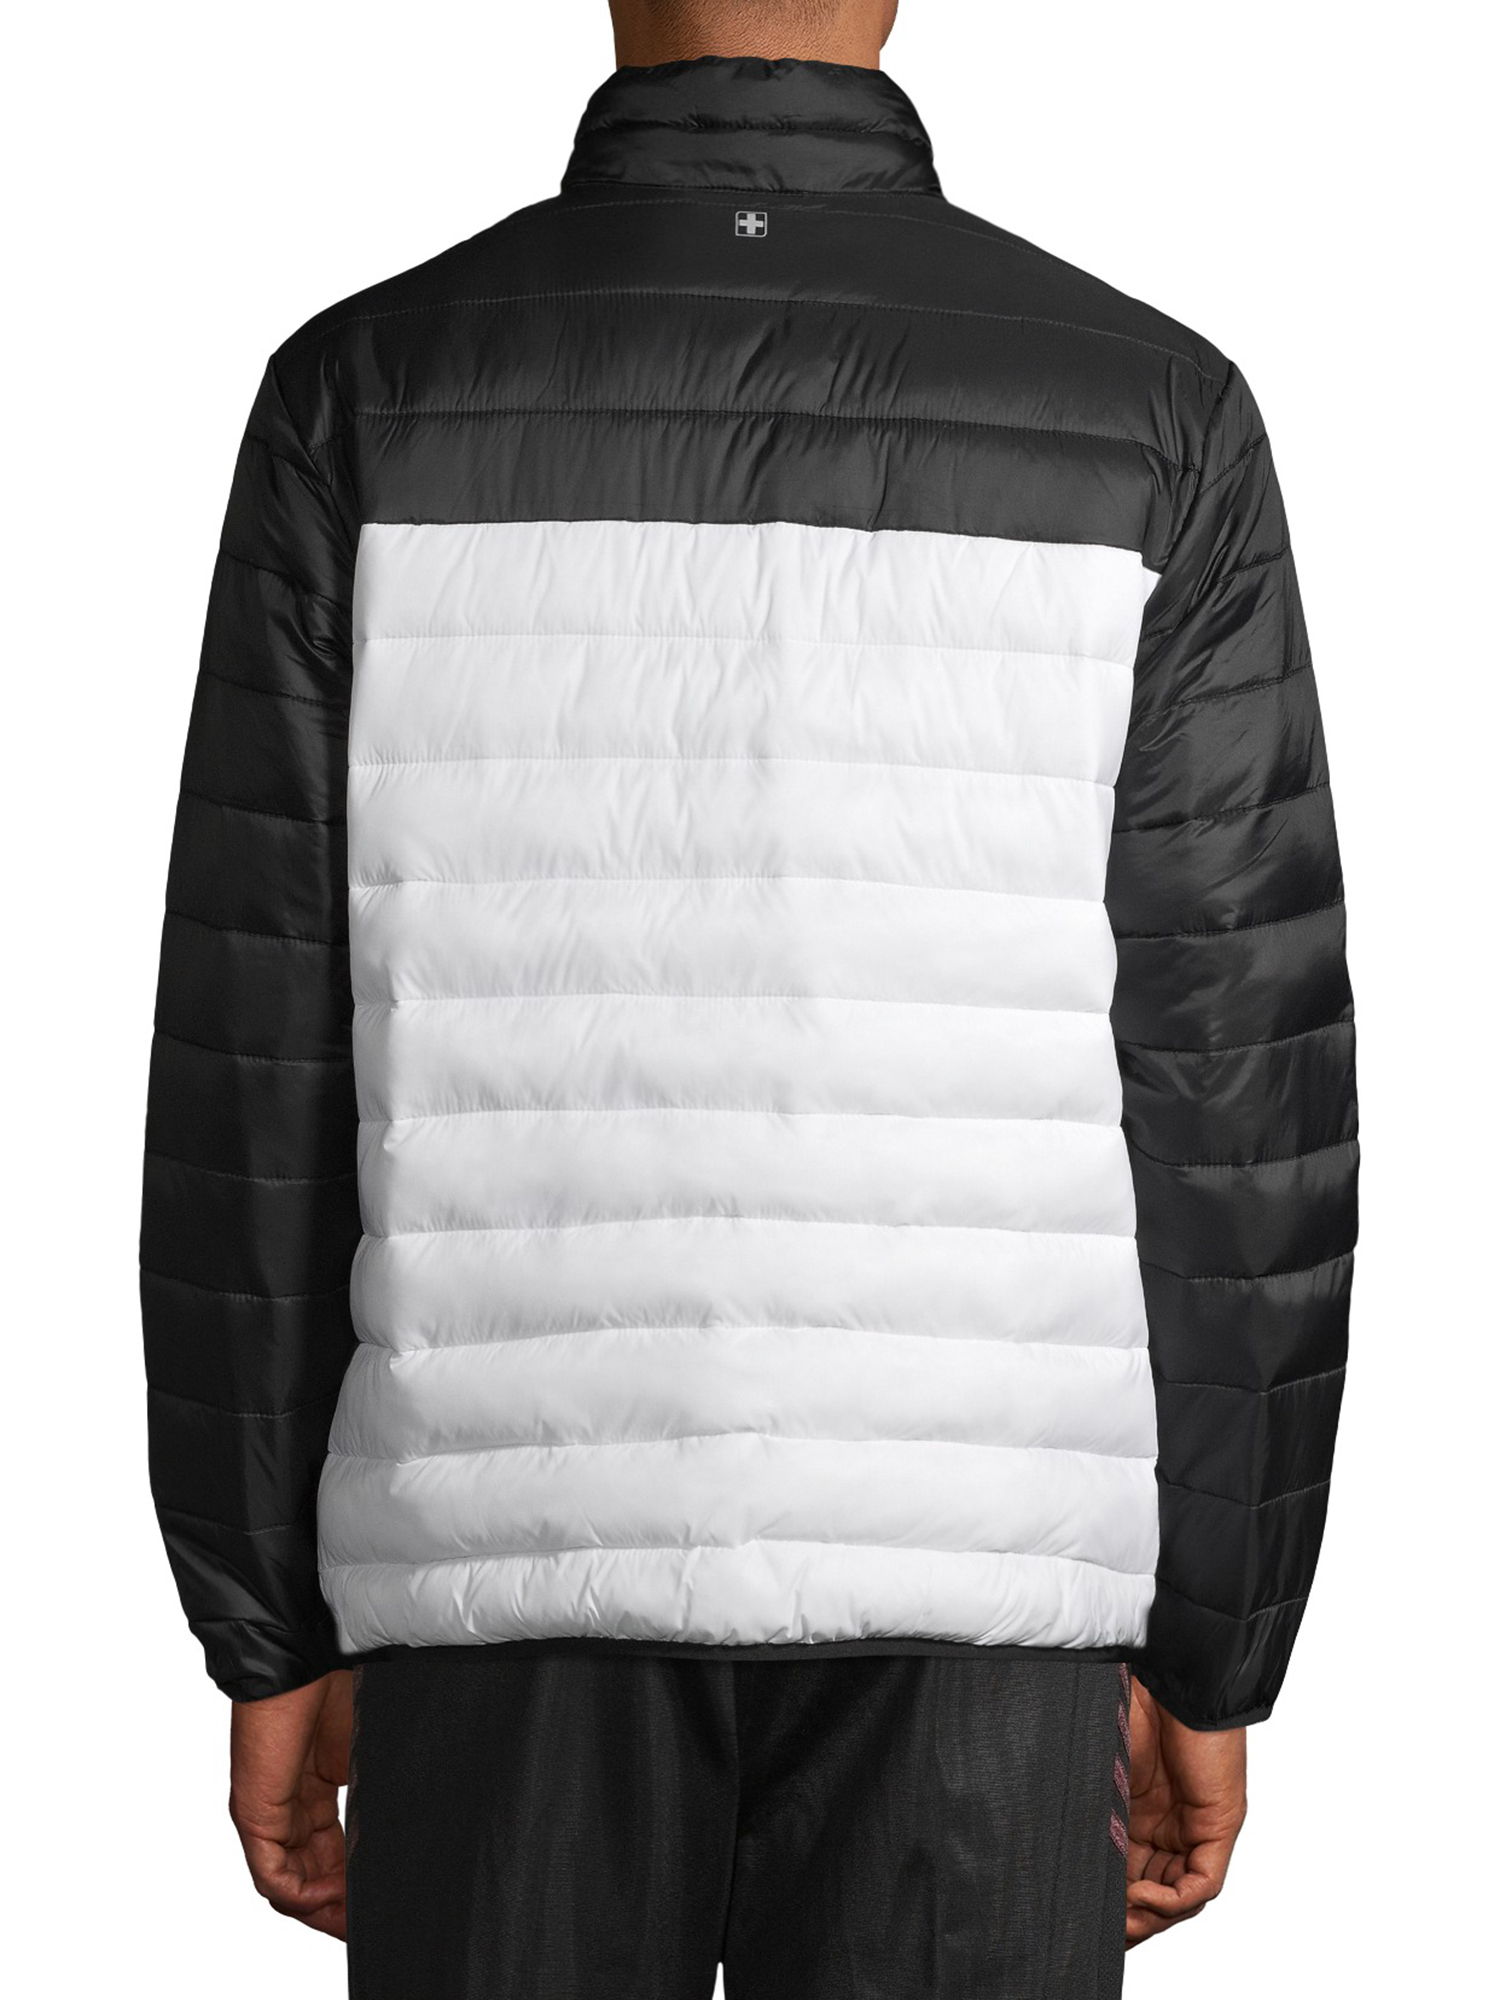 SwissTech Men's and Big Men's Puffer Jacket, Up to Size 5XL - image 4 of 6